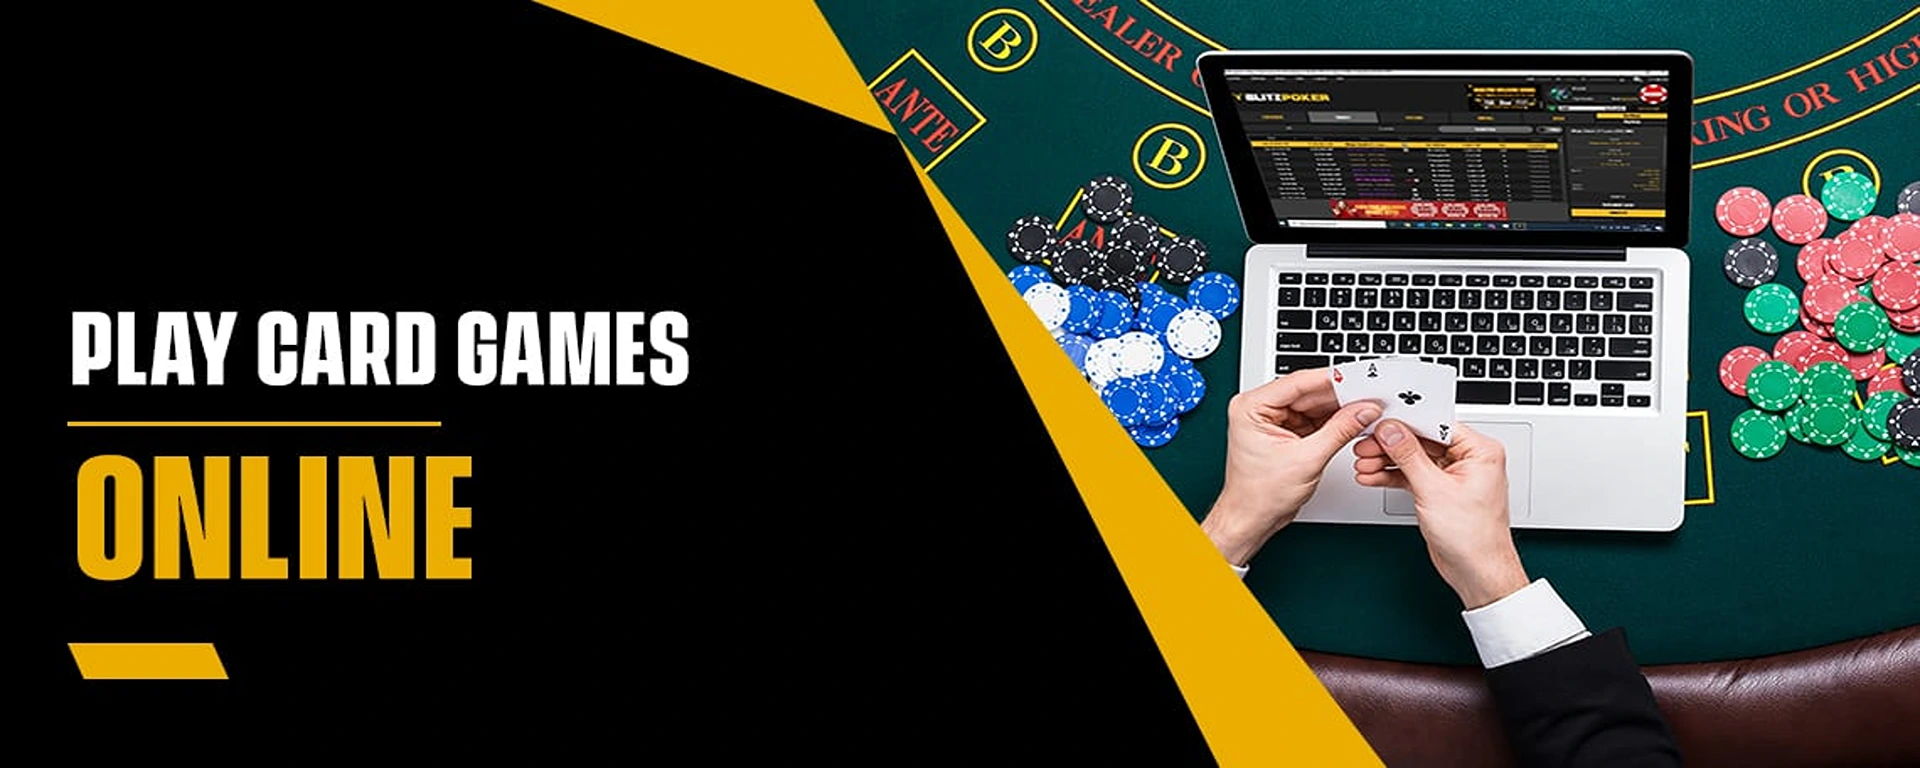 Play Card Games Online – Best Poker Games Available Online